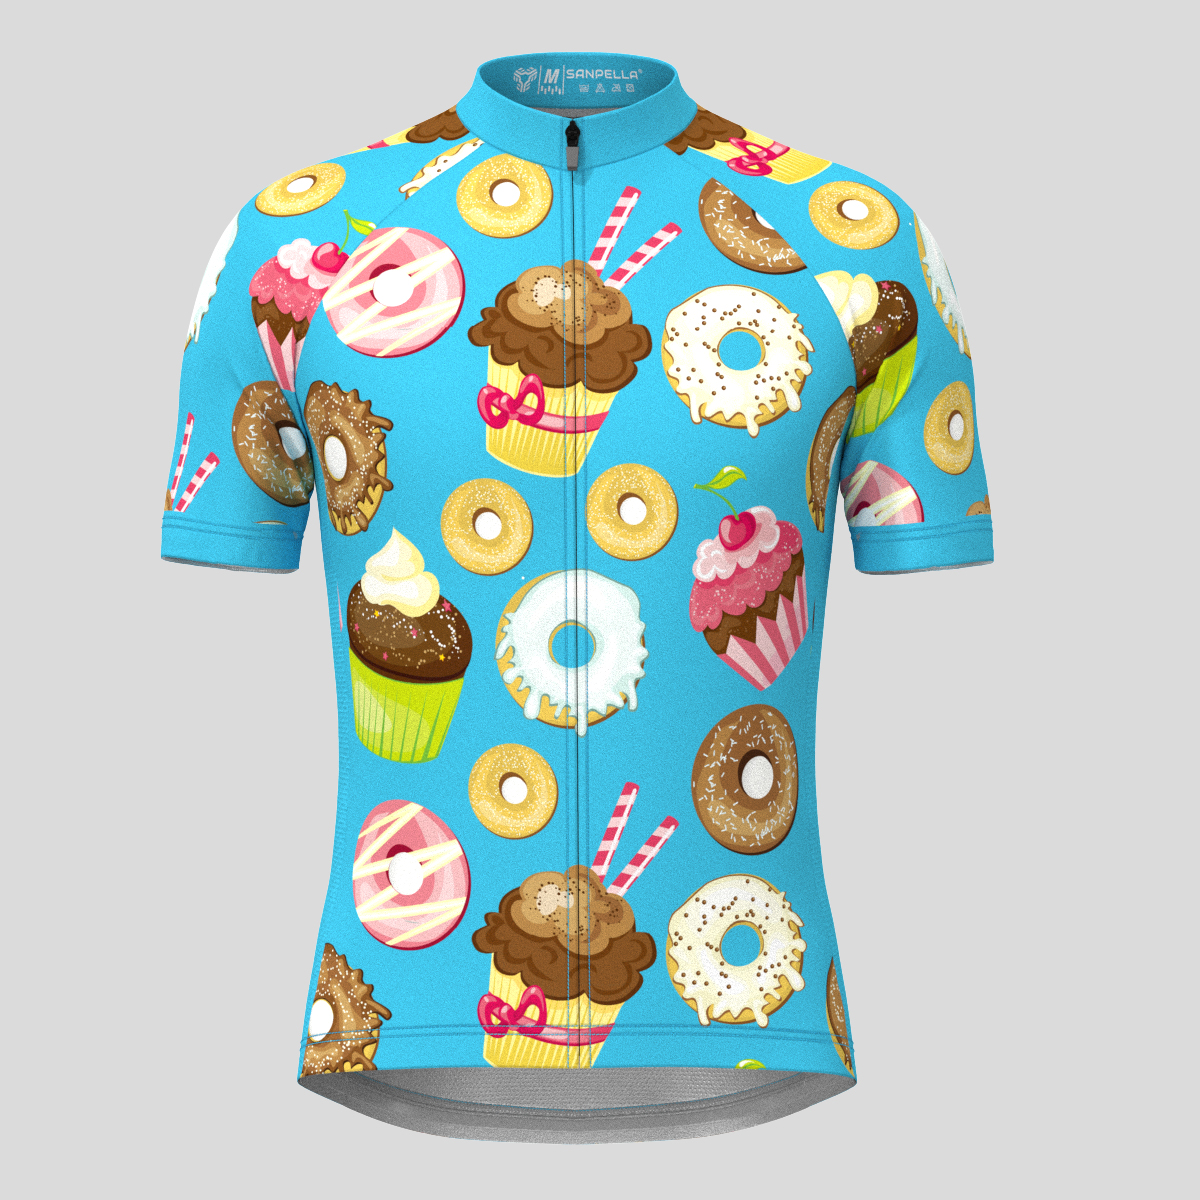 Treat Yourself Sweets Men's Cycling Jersey